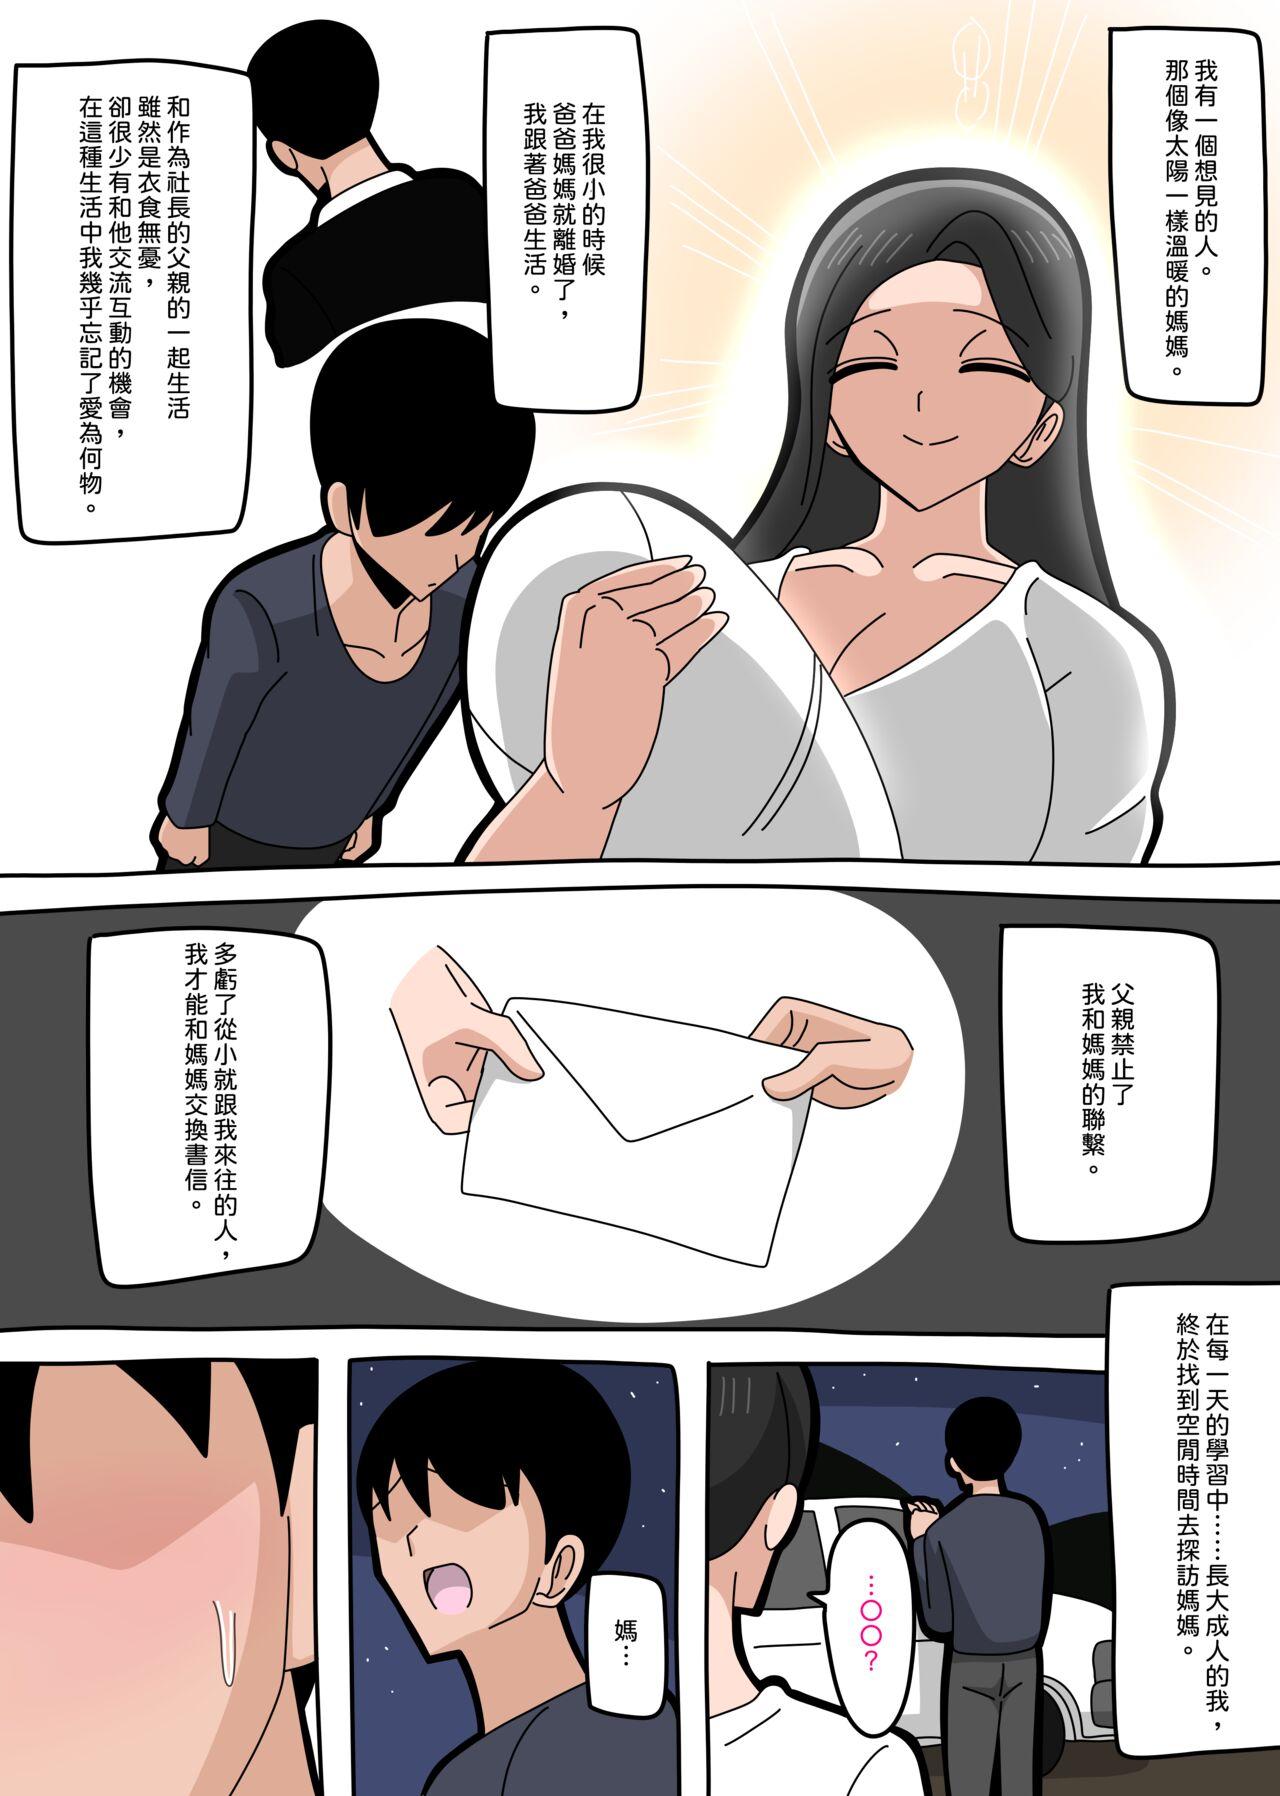 Chica [18master] 2023-5-24 Meeting mom again after a long separation | 與媽媽重逢… [Chinese][興趣使然的個人機翻] - Original Erotic - Page 1